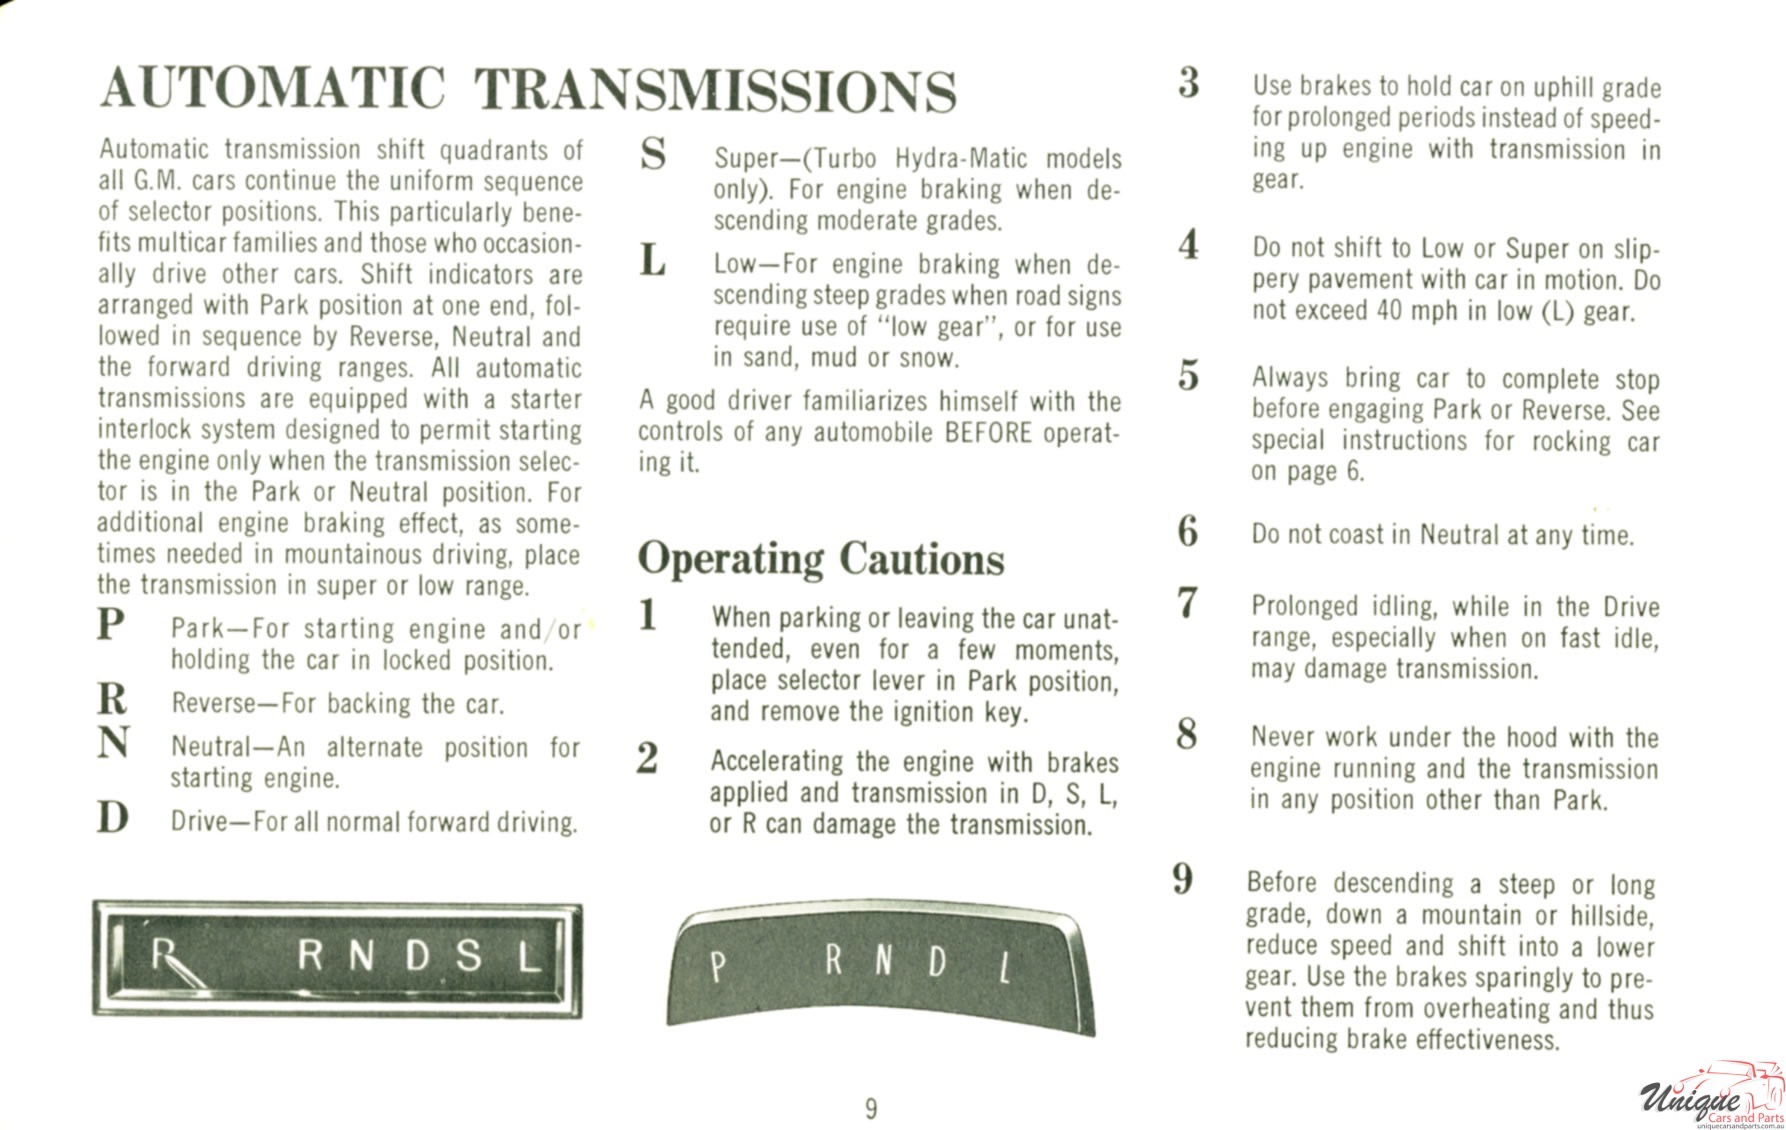 1969 Pontiac Owners Manual Page 52